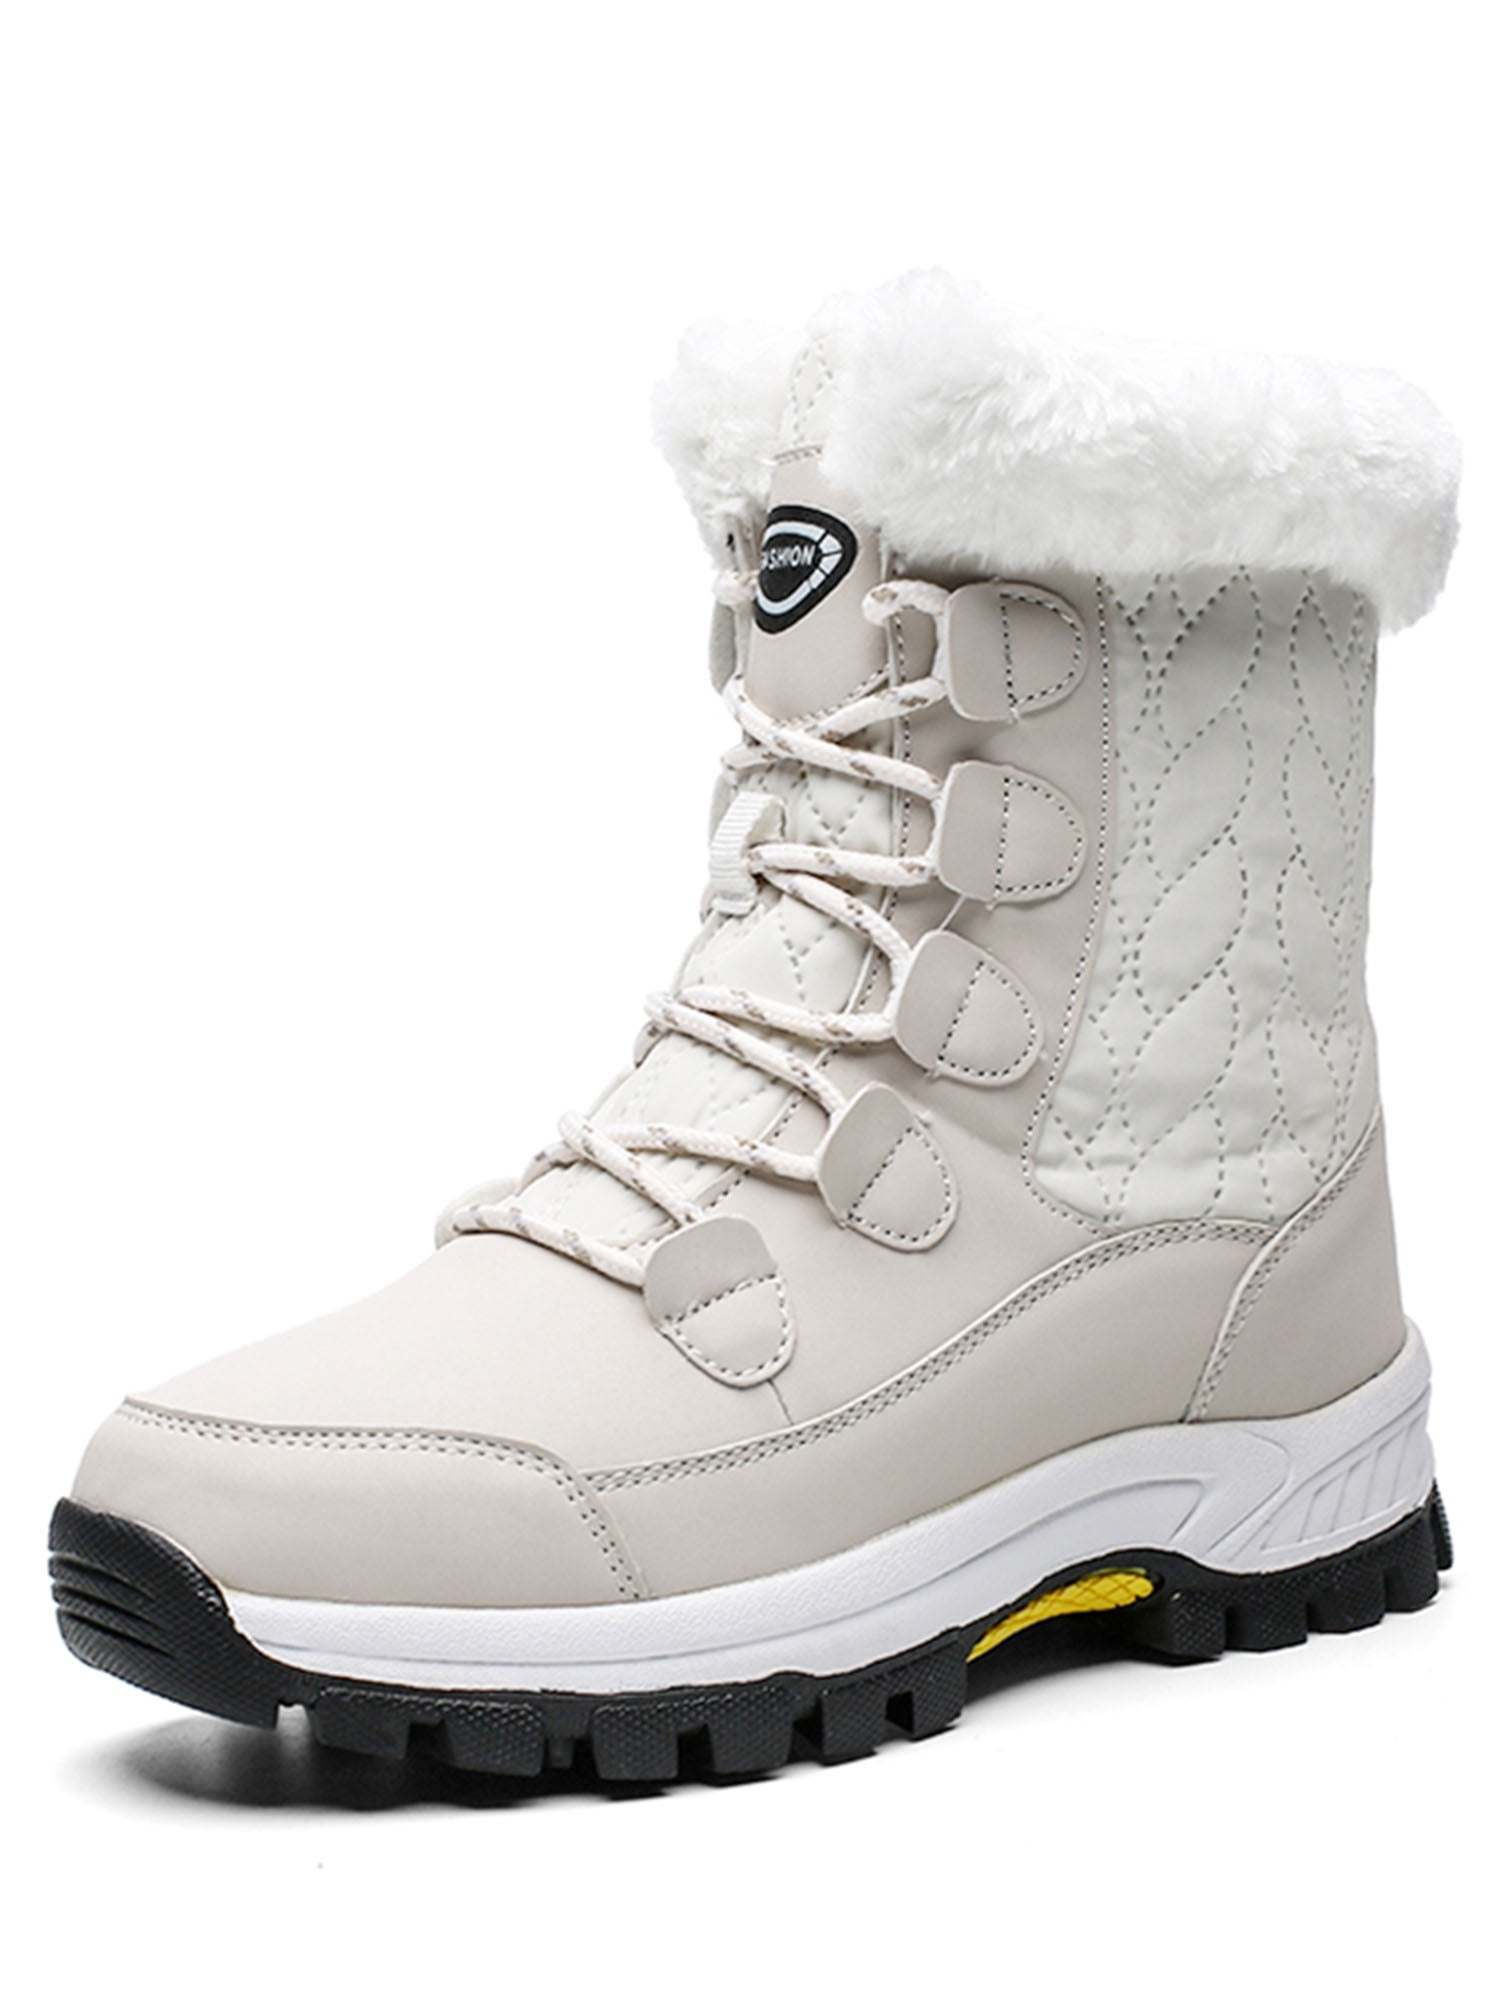 OFF.WHITE NEW WOMEN MID-CALF FUR LINED FLAT HEEL WINTER SNOW BOOTS COCO-03 